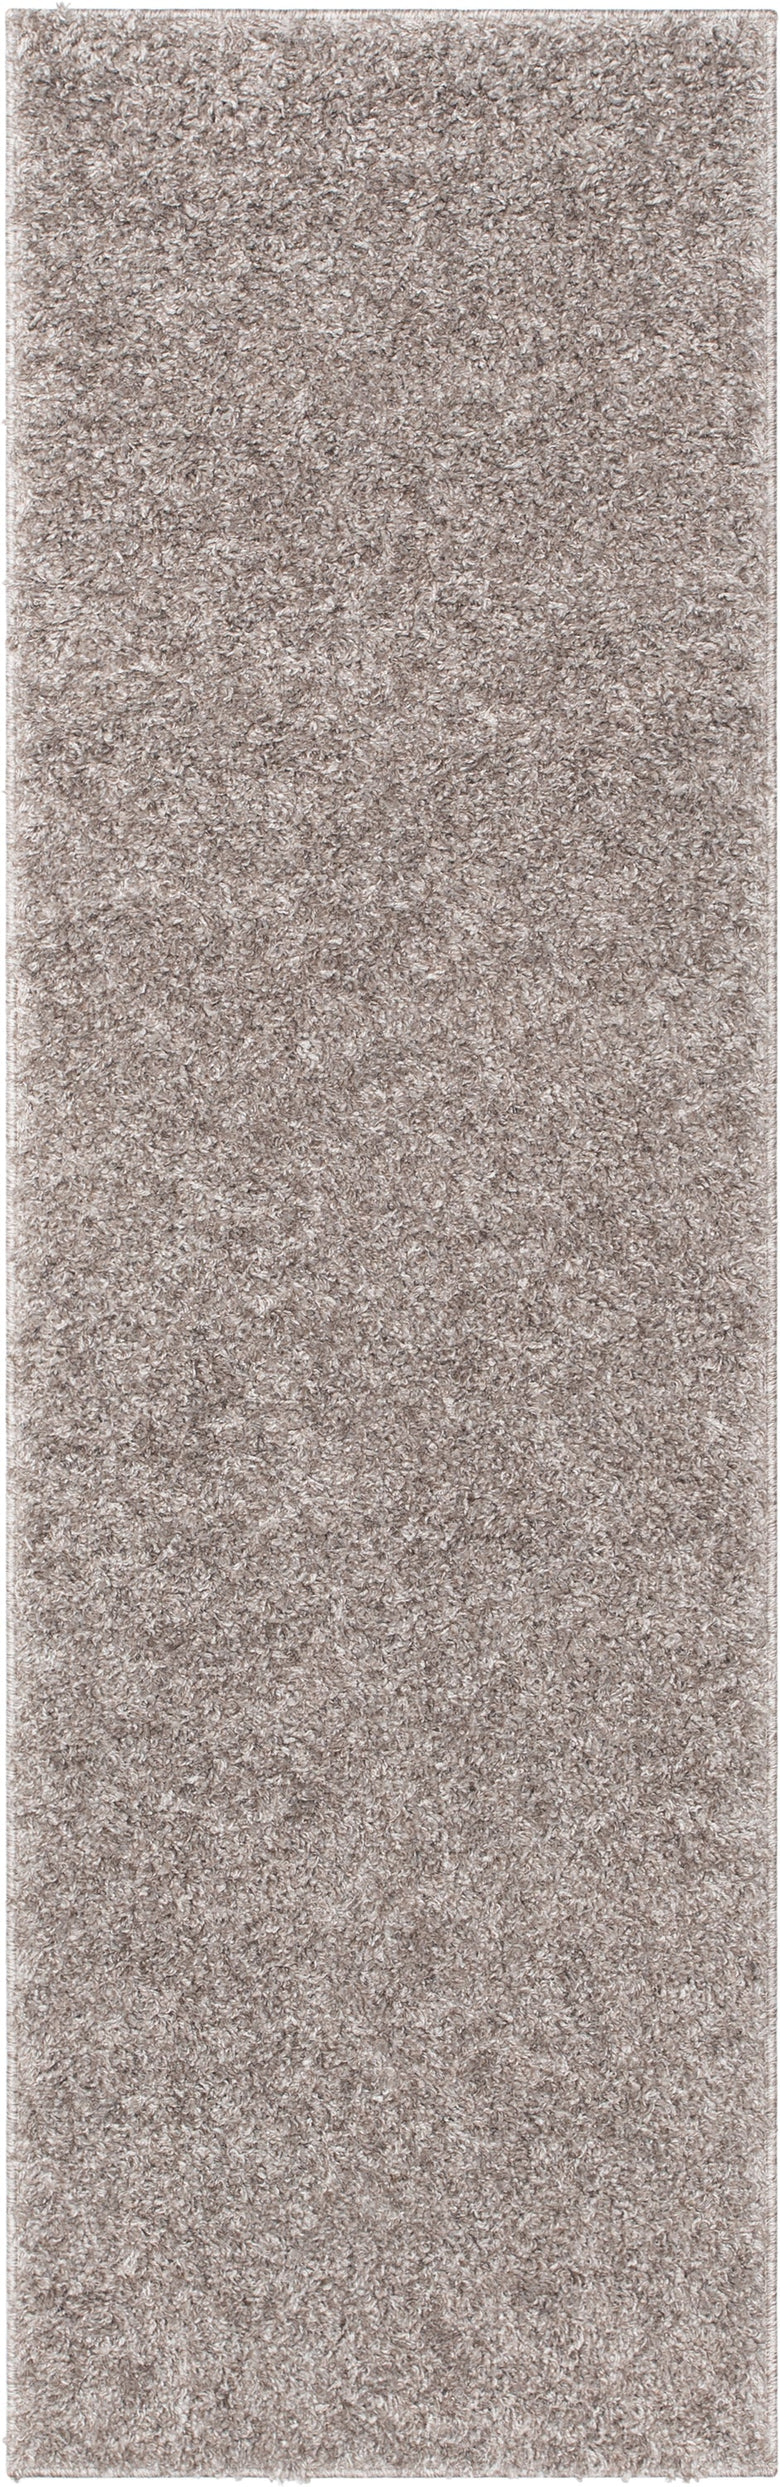 Emerson Modern Solid Taupe Thick & Soft Shag Rug ELL-18